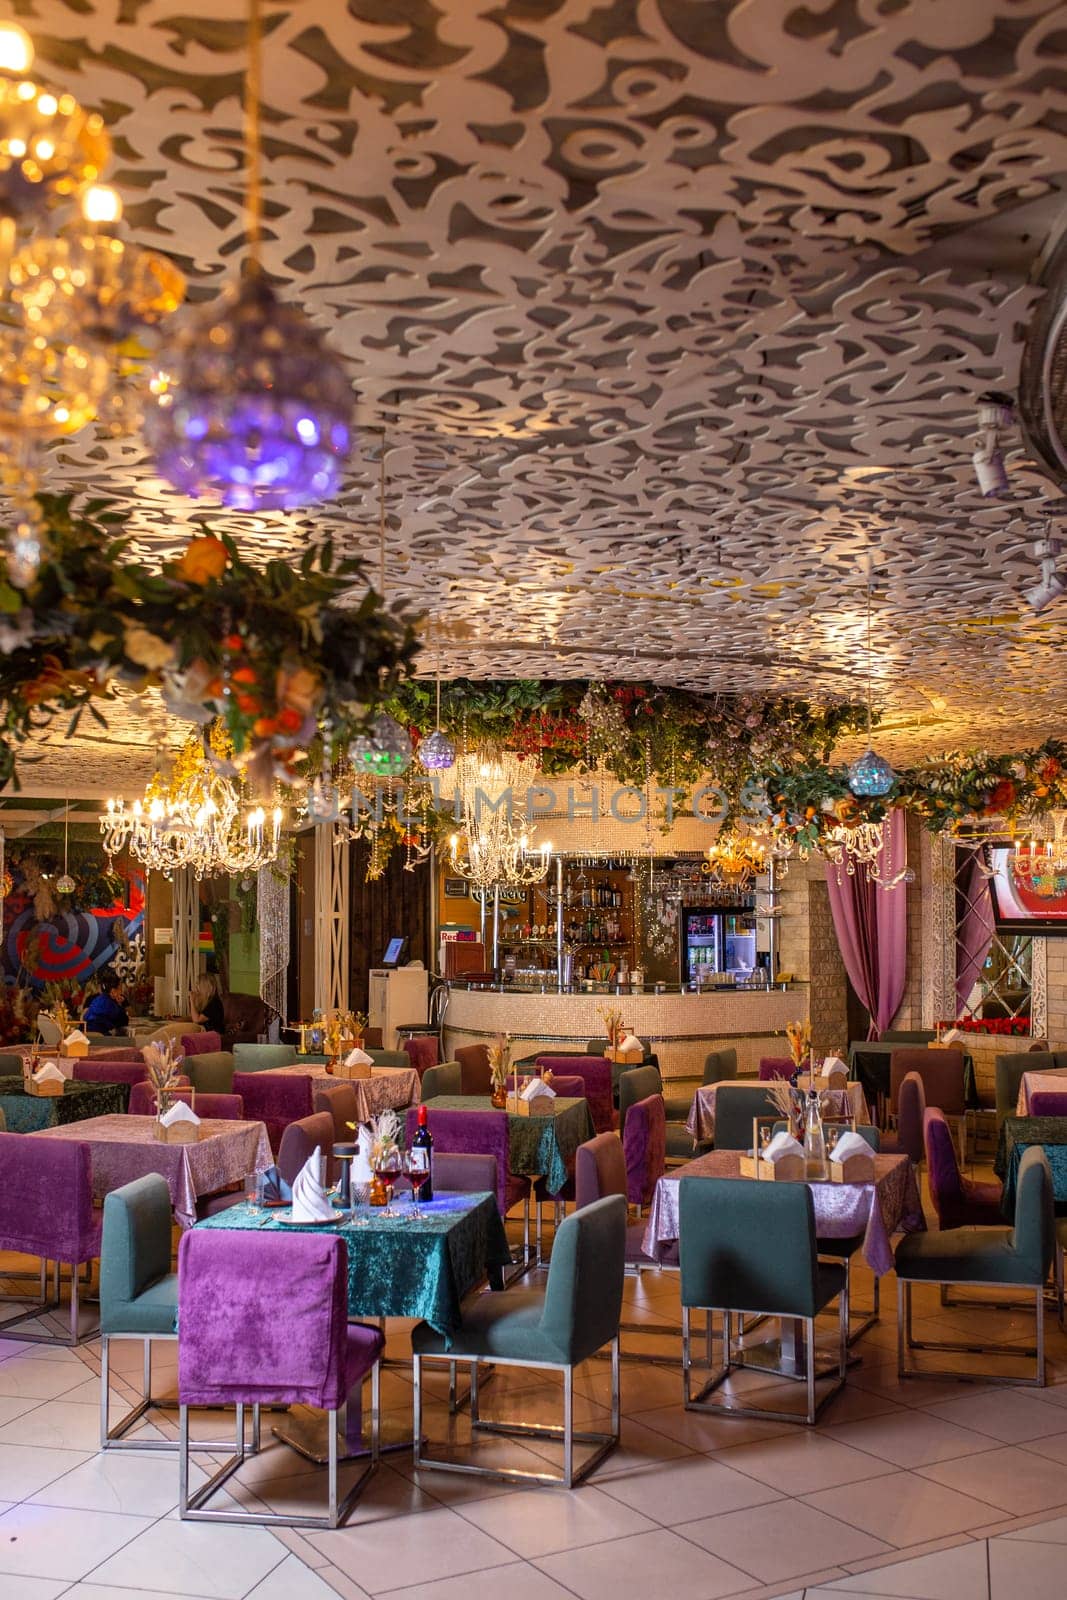 Elegant restaurant interior with round tables, purple tablecloths, chandeliers, and floral decor. Wine bottle on the table.